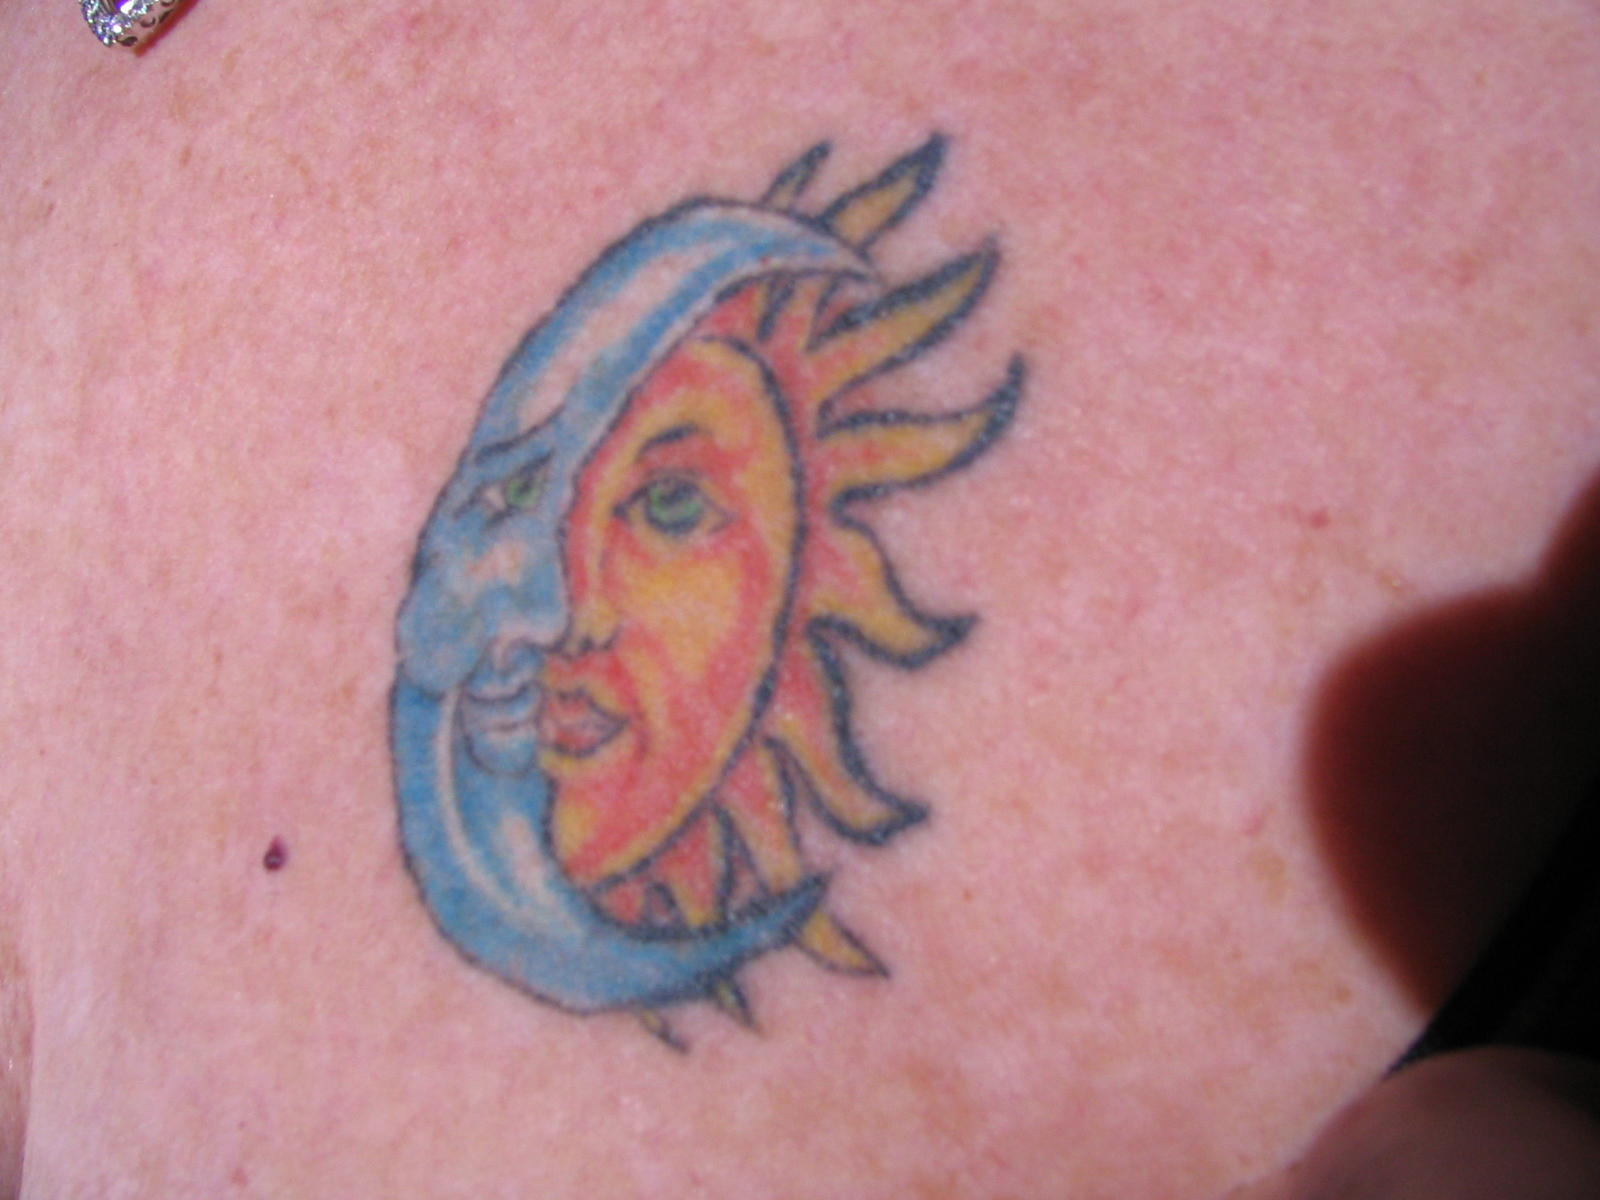 tattoo of the sunmoon and